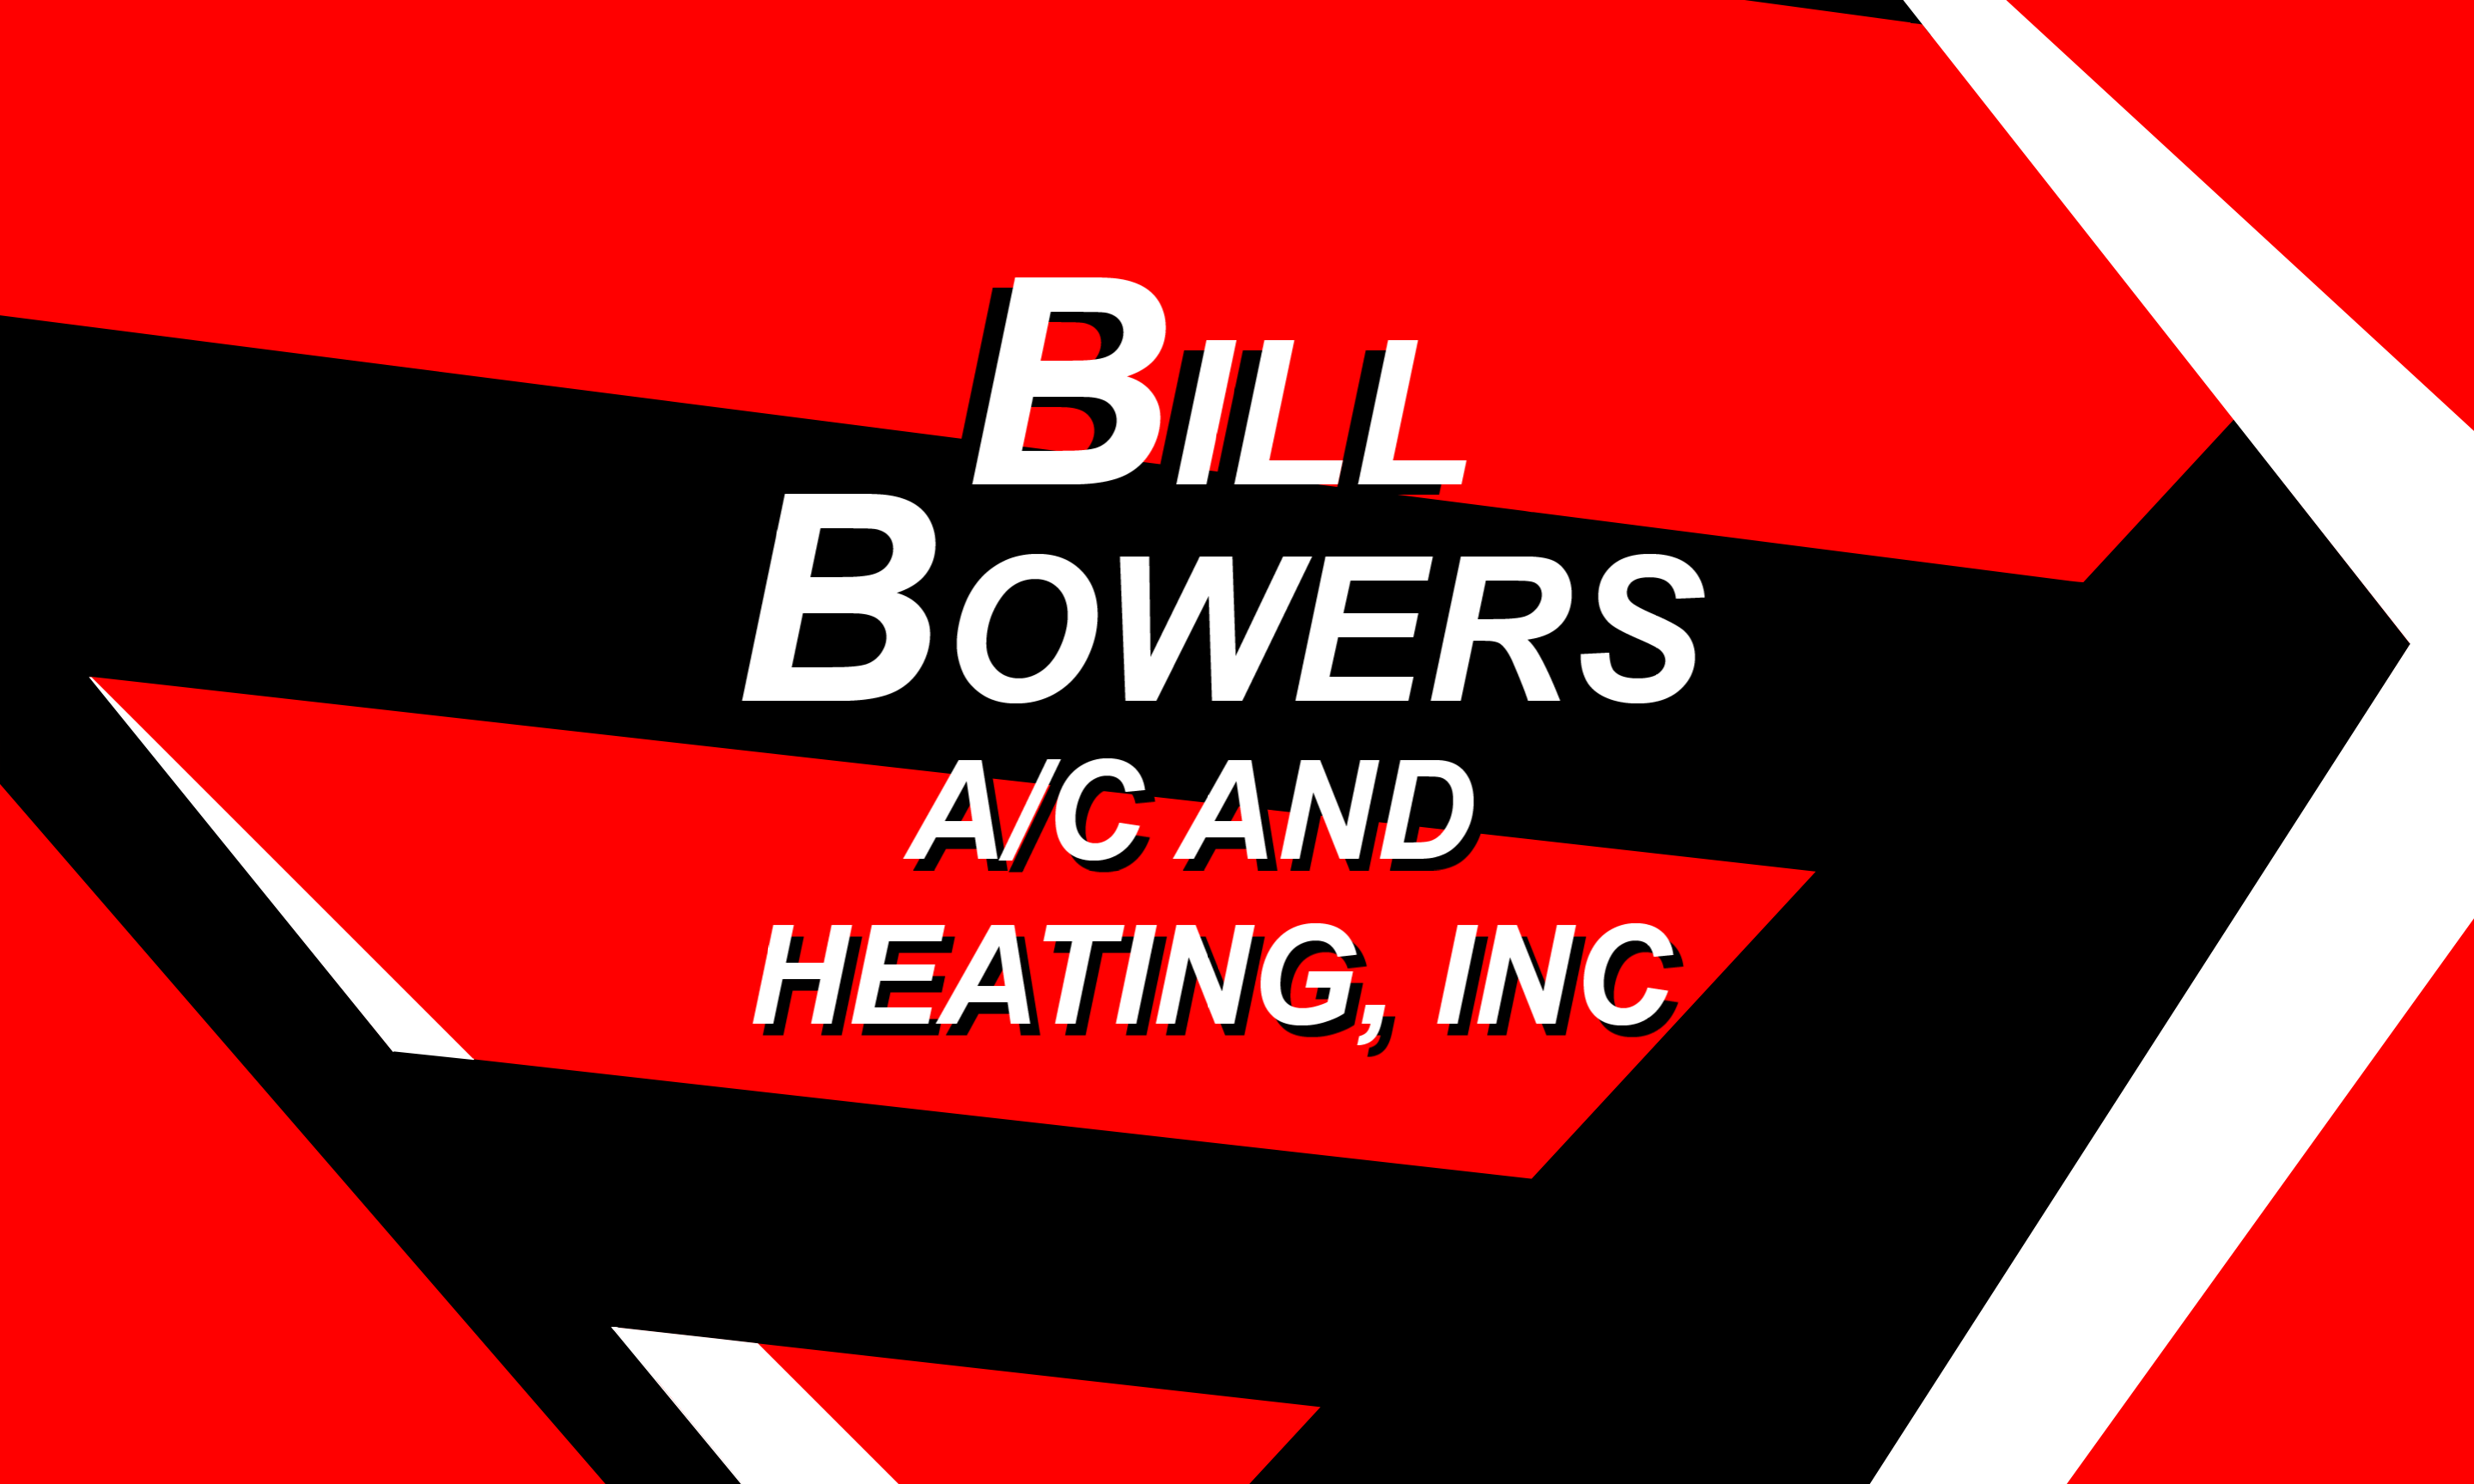 Bill Bowers A/C and Heating, Inc. Logo